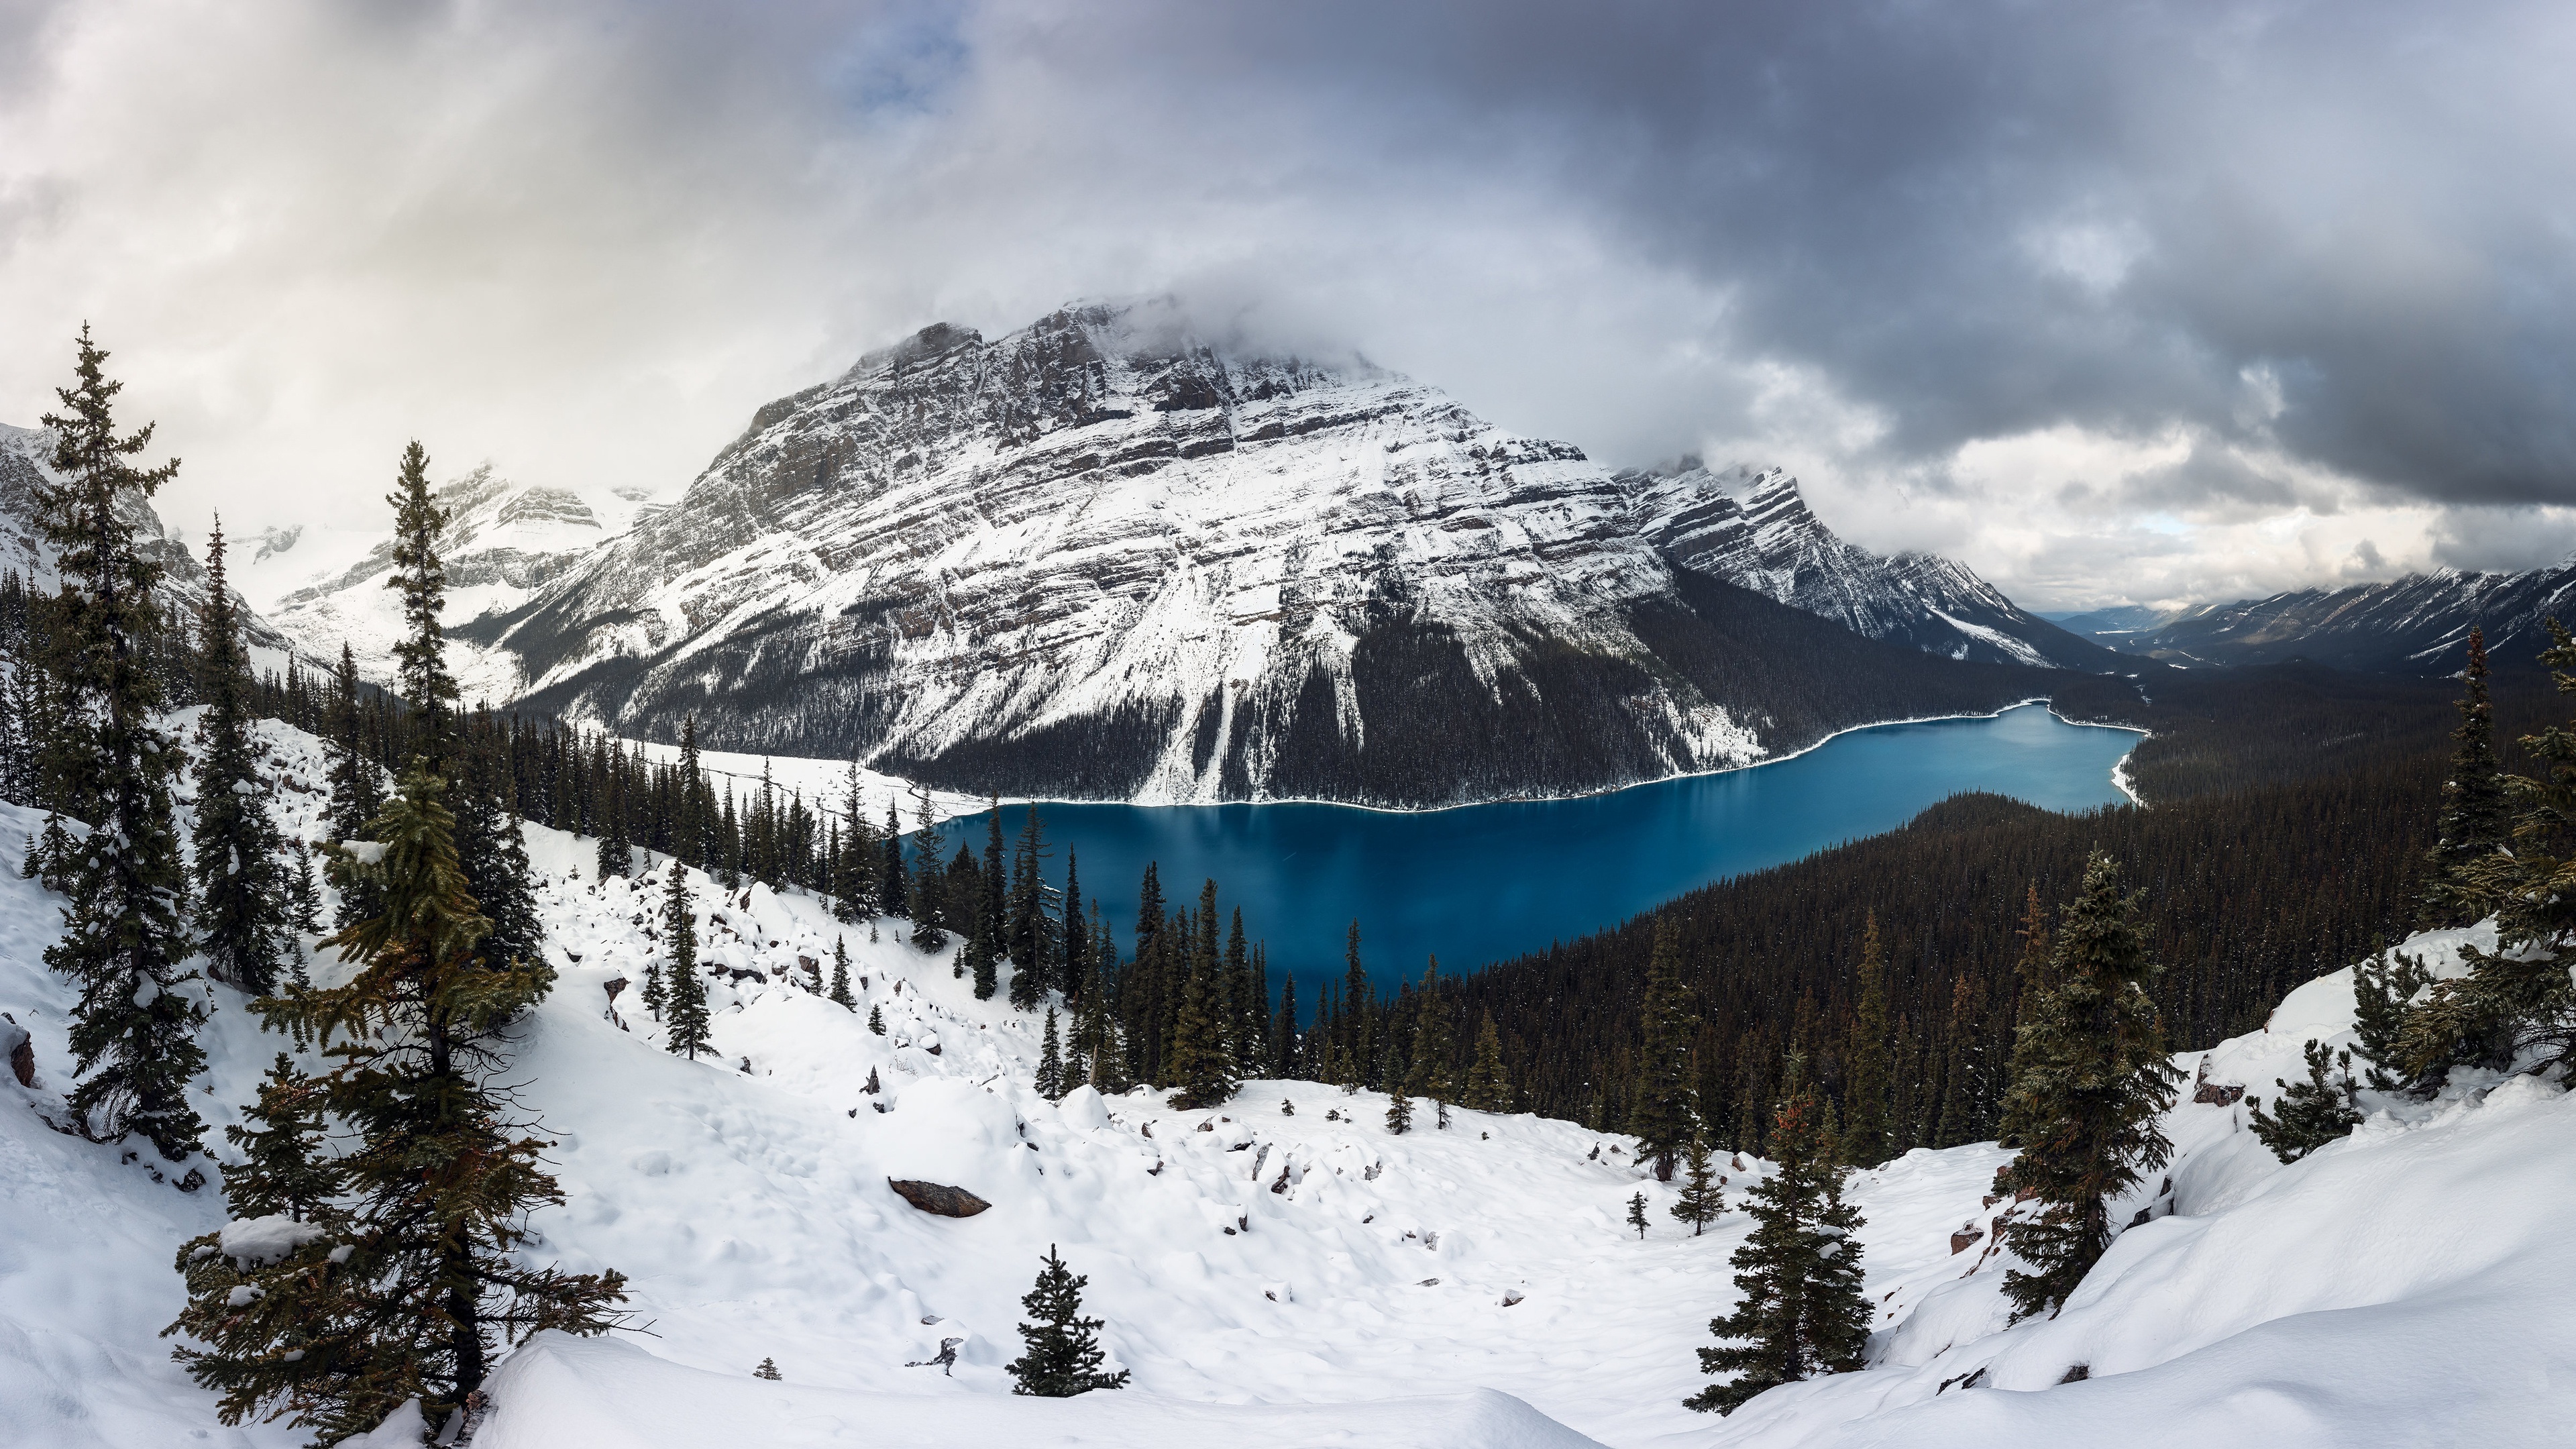 General 3840x2160 landscape mountains lake snow forest trees winter Canada Peyto Lake Banff National Park